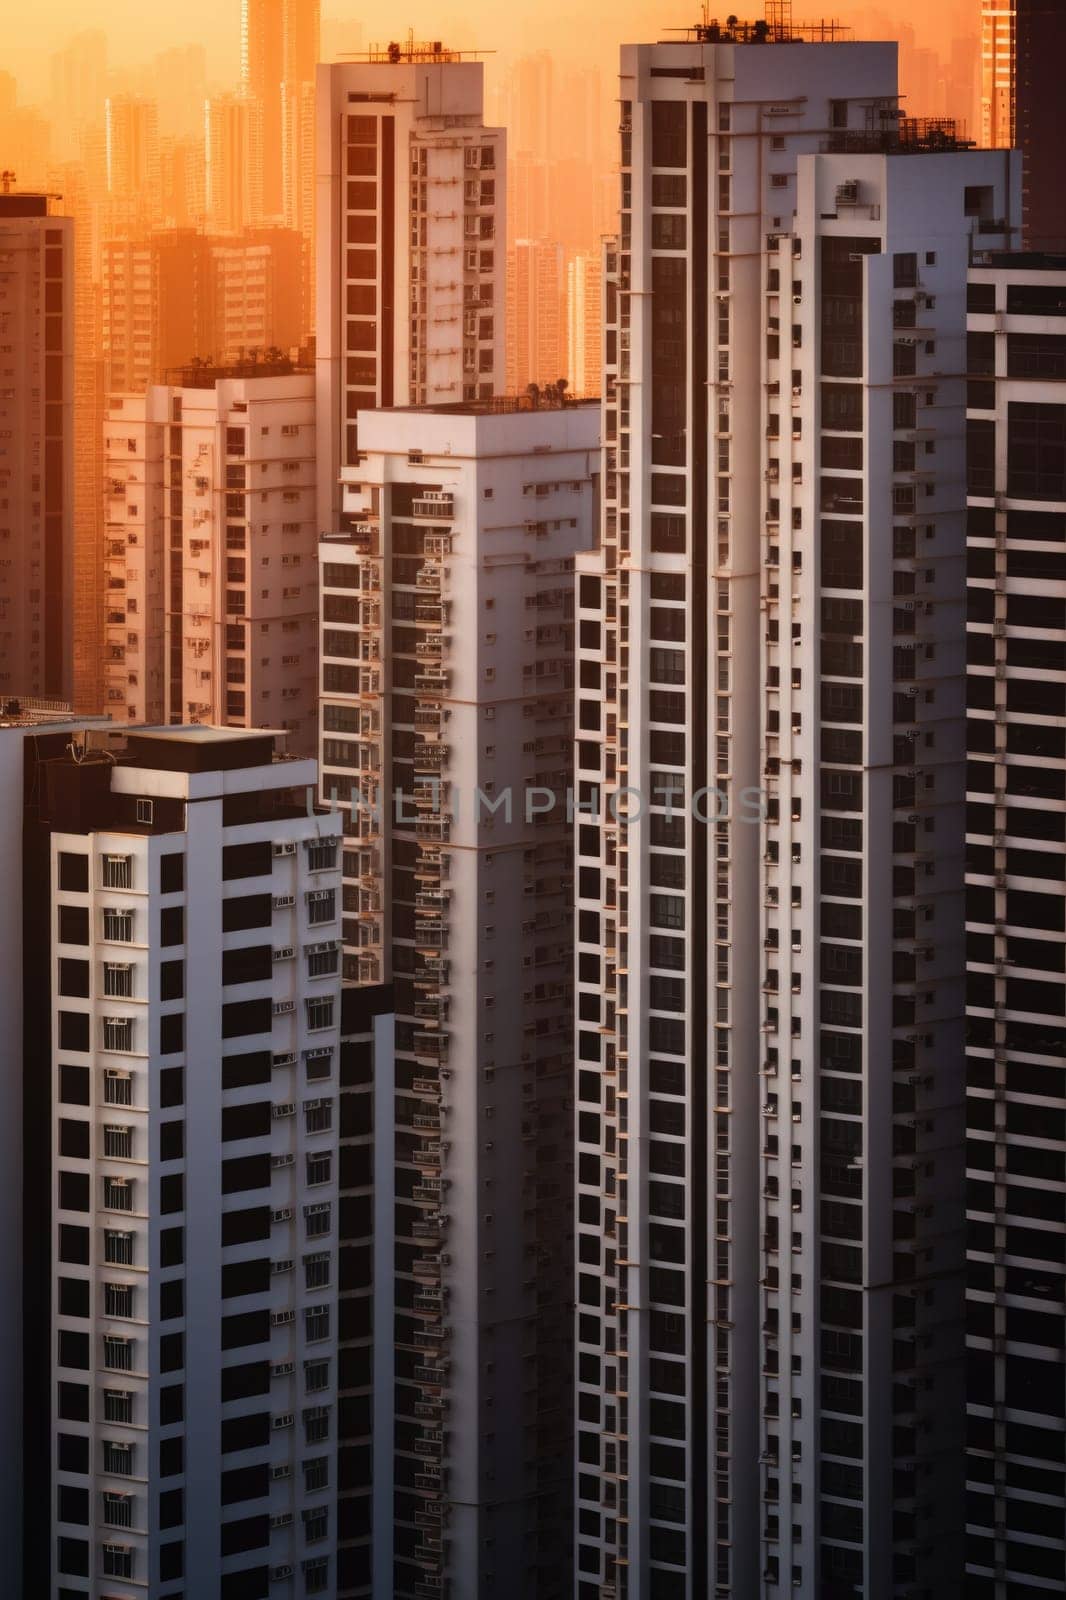 High density residential architecture city downtown buildings comeliness